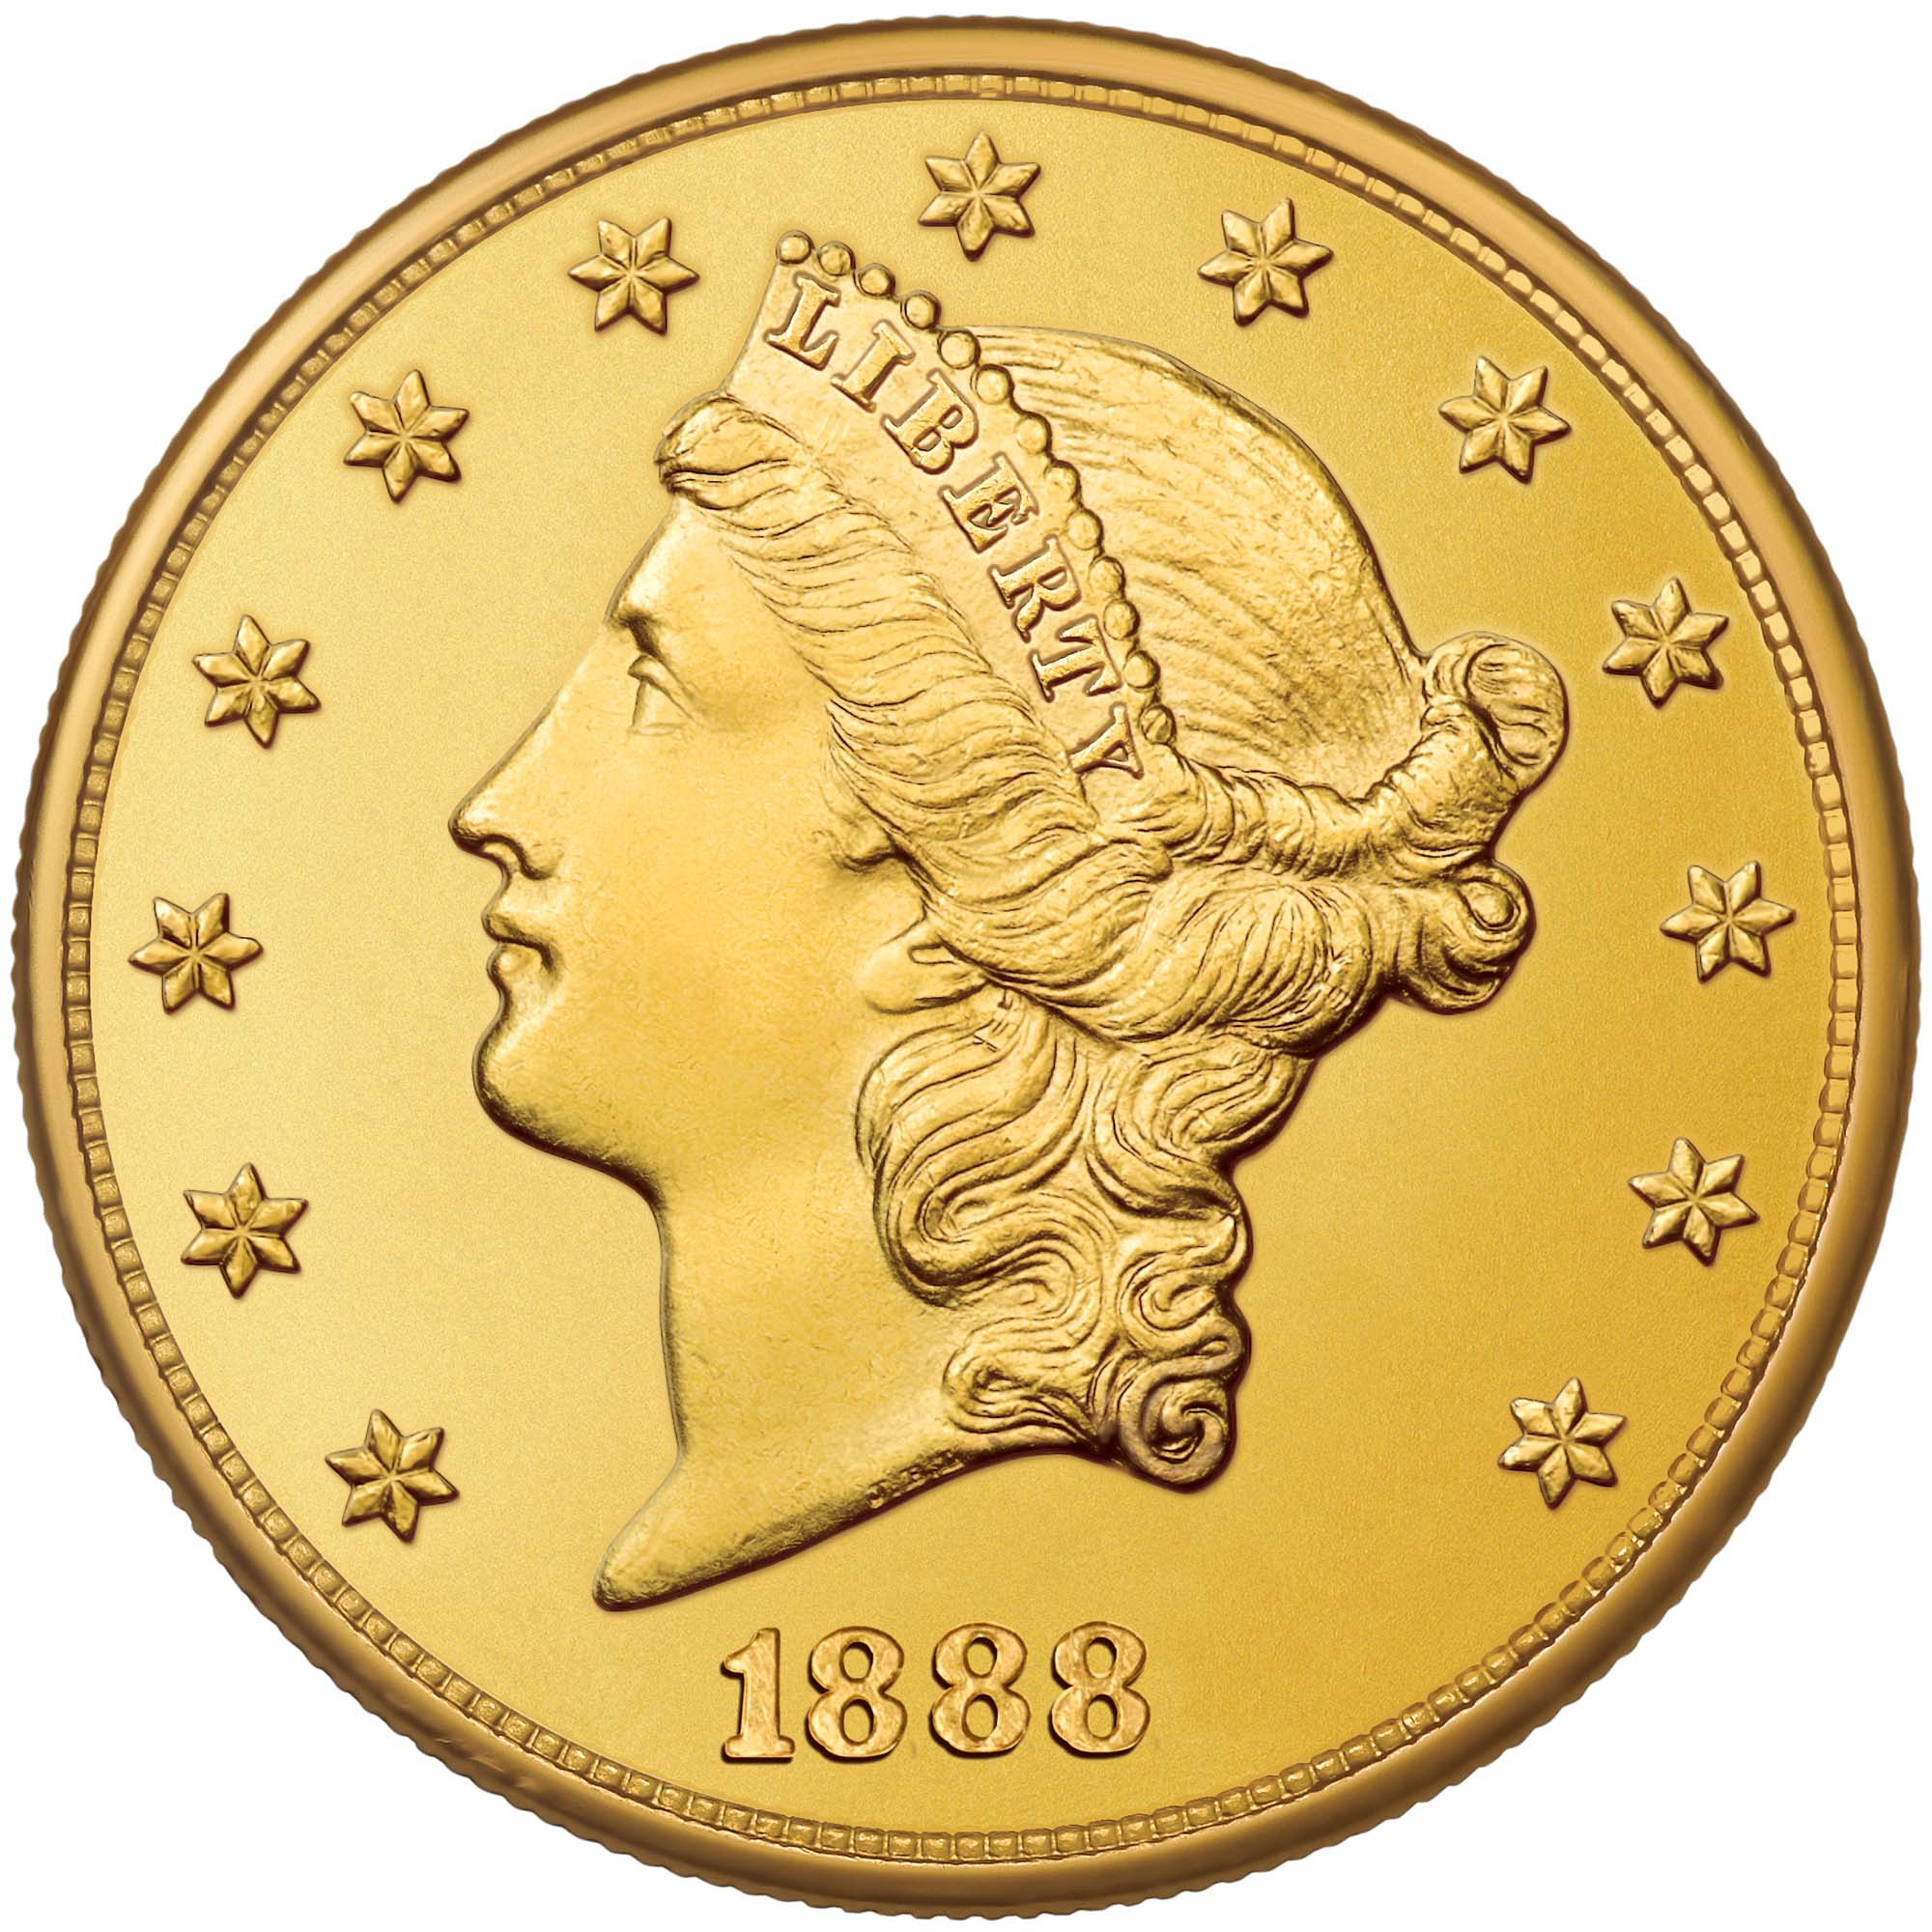 four centuries of america's largest gold coins GC4 a Main